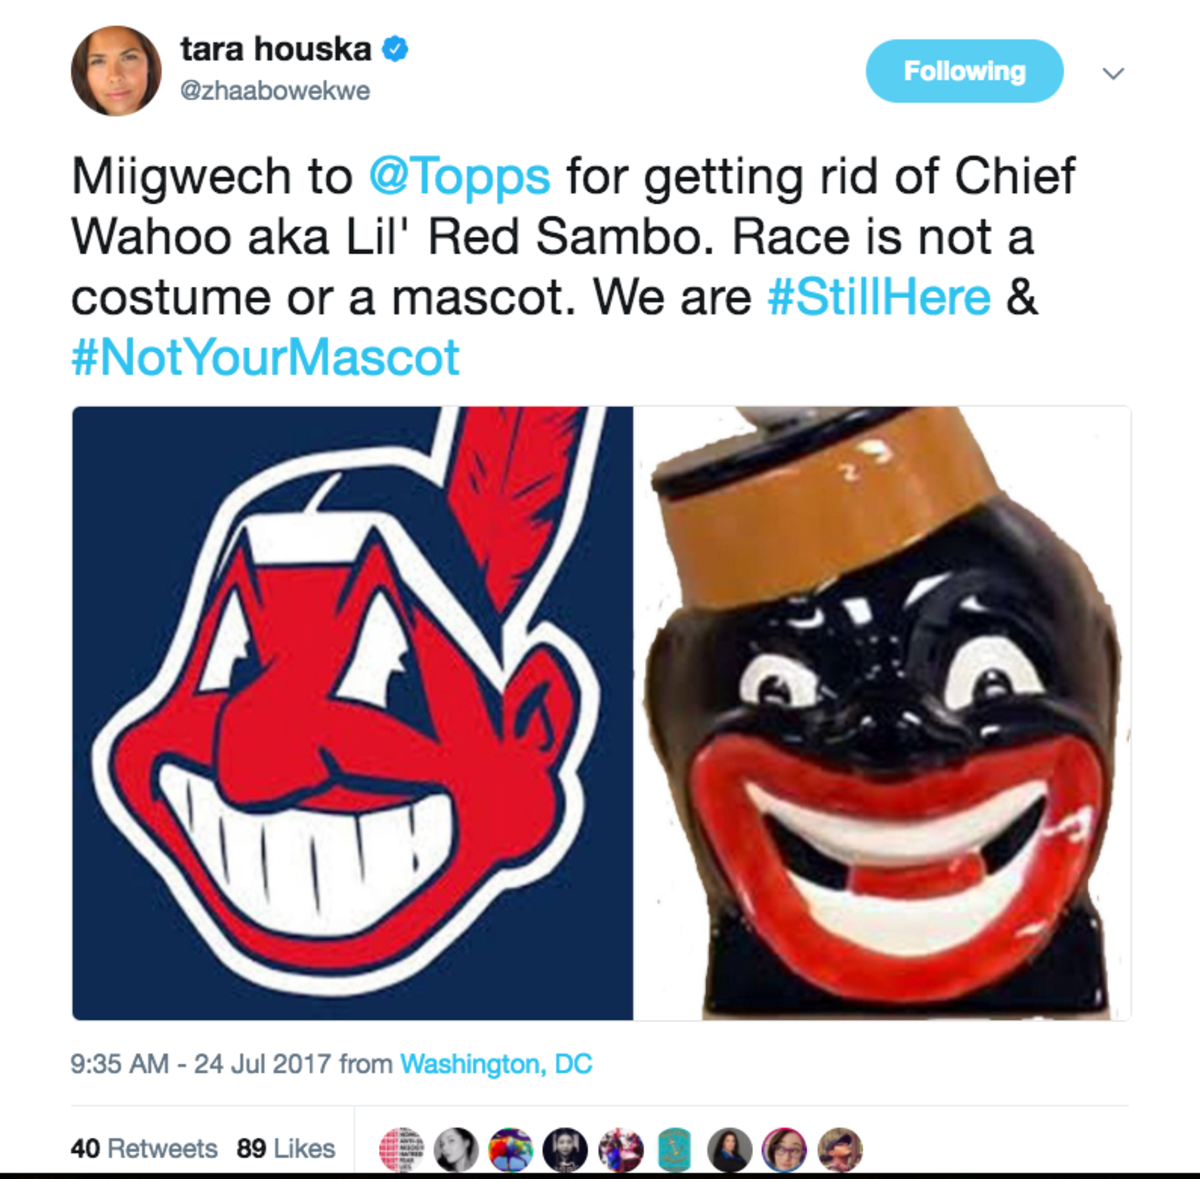 Topps Phases Out Chief Wahoo From Its Card Logos